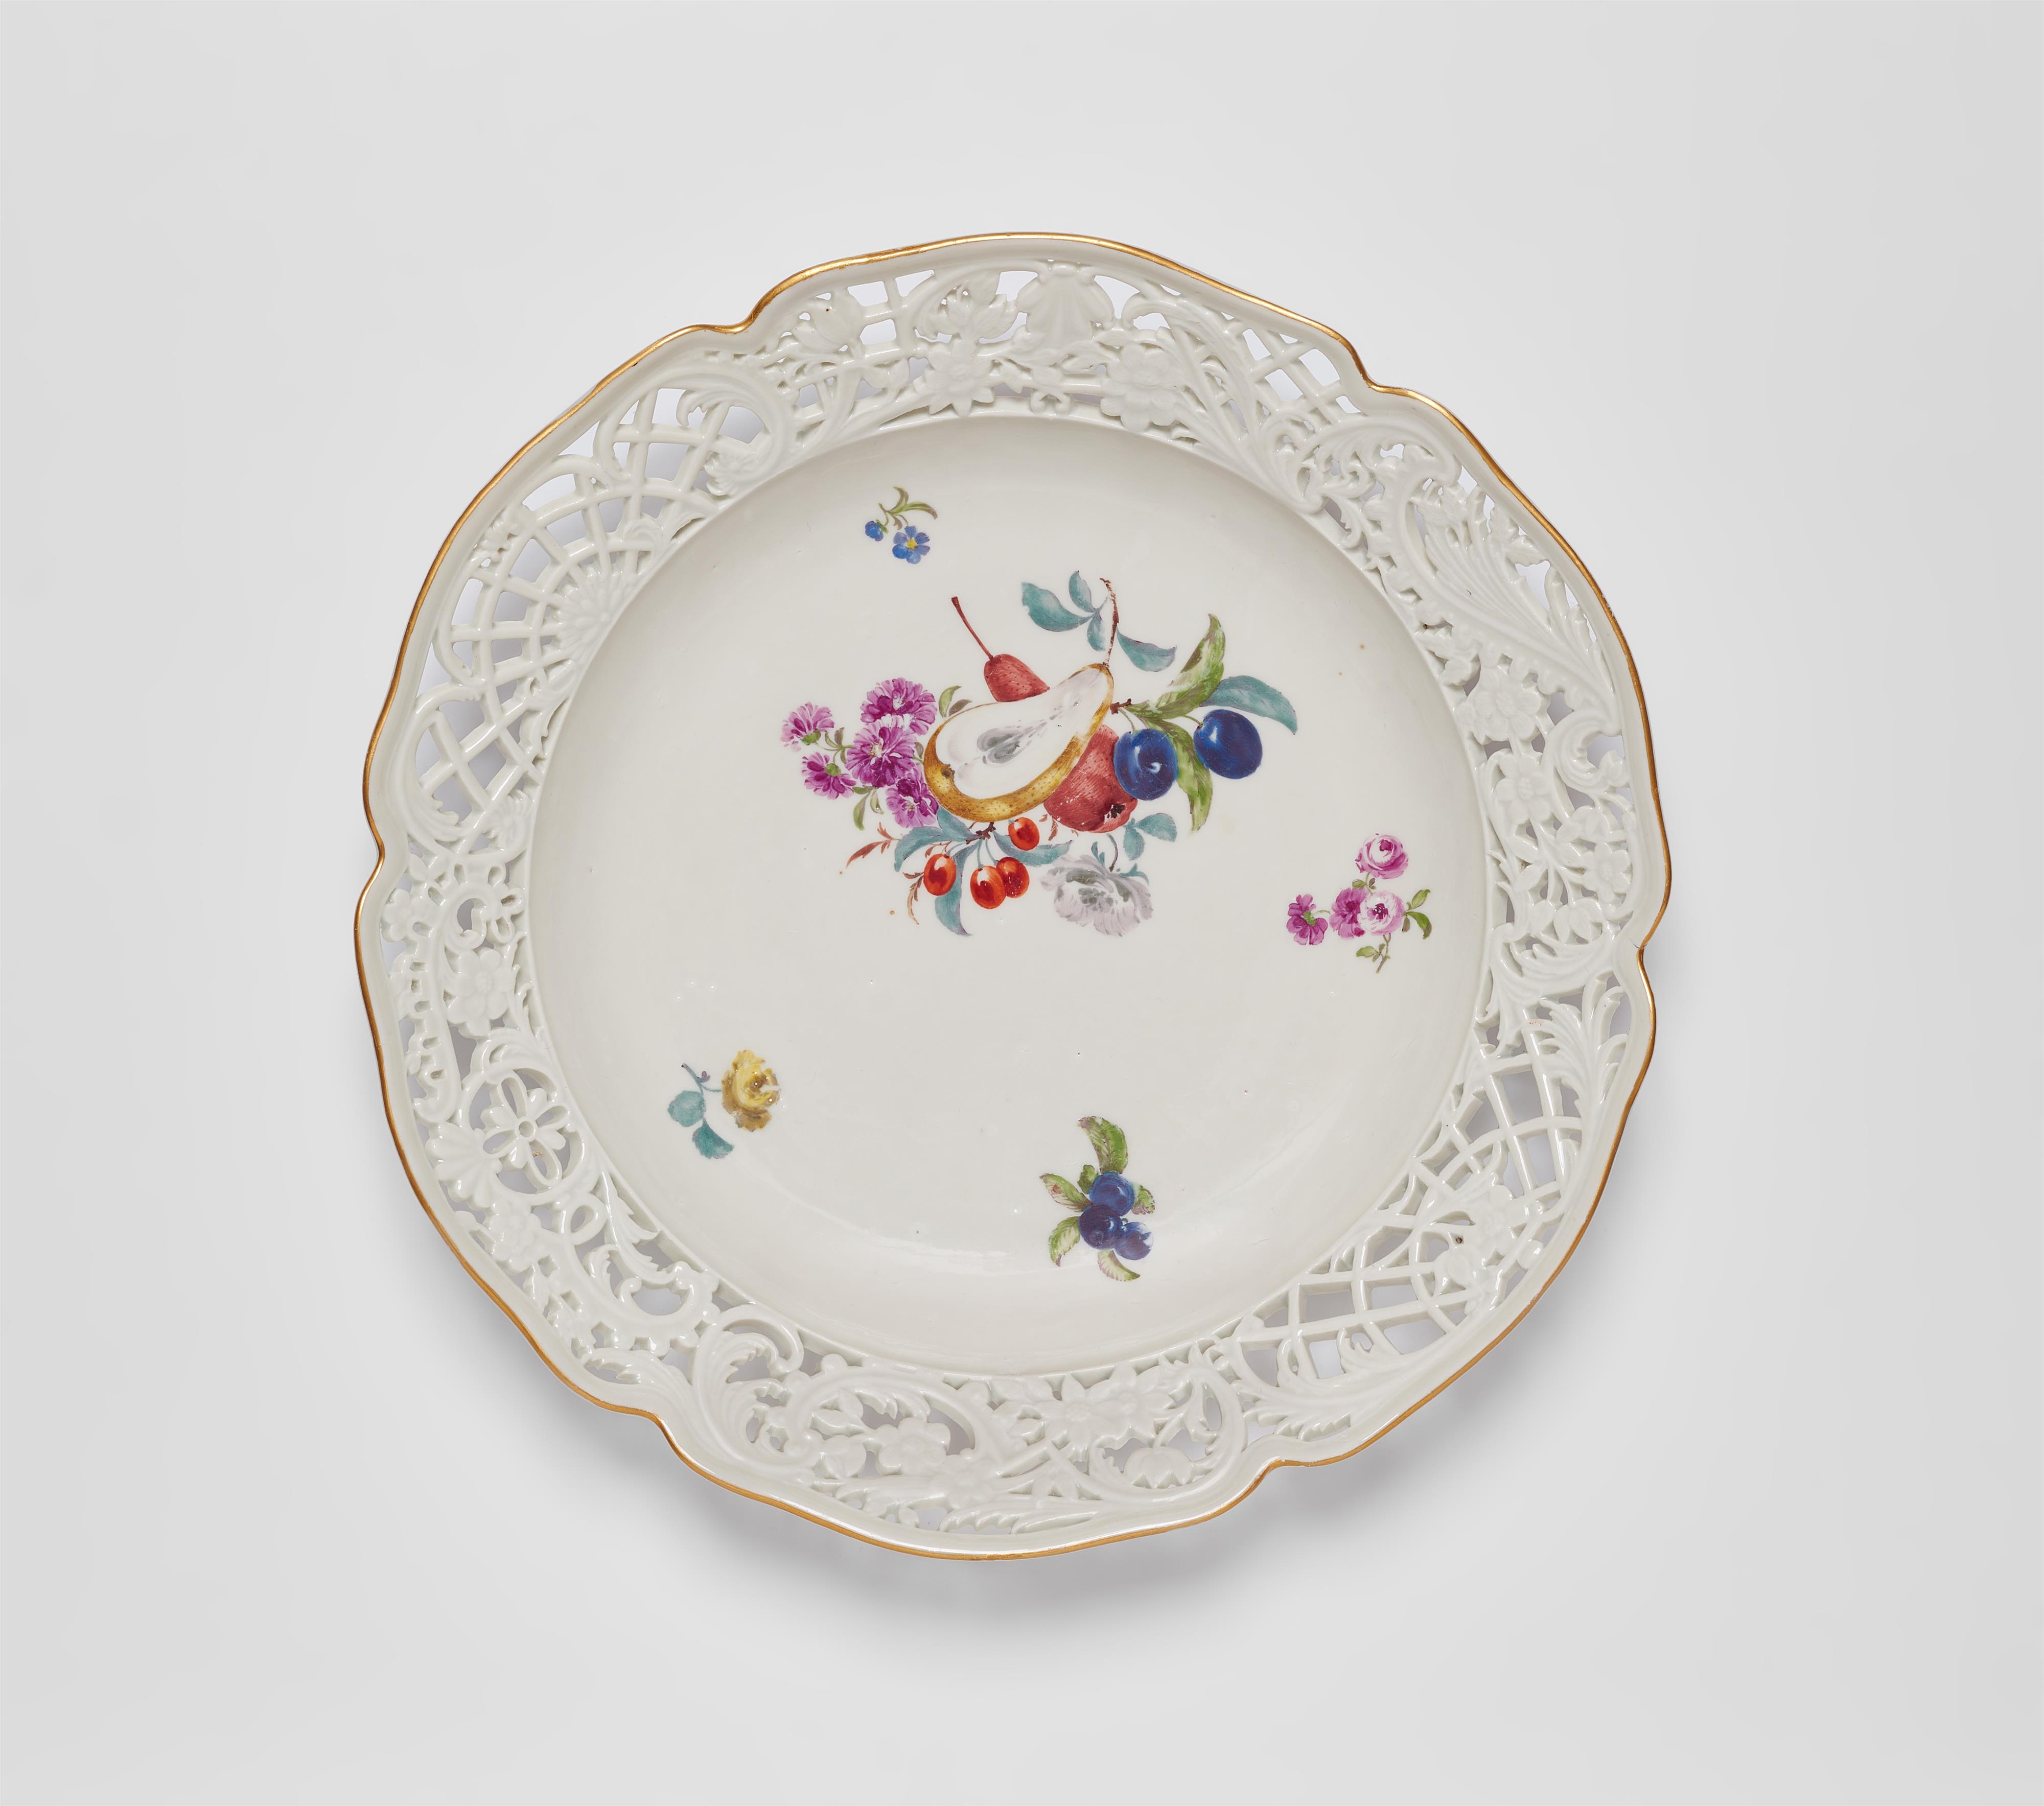 A Meissen porcelain dessert plate with fruit and flowers from a service for King Frederick II - image-1